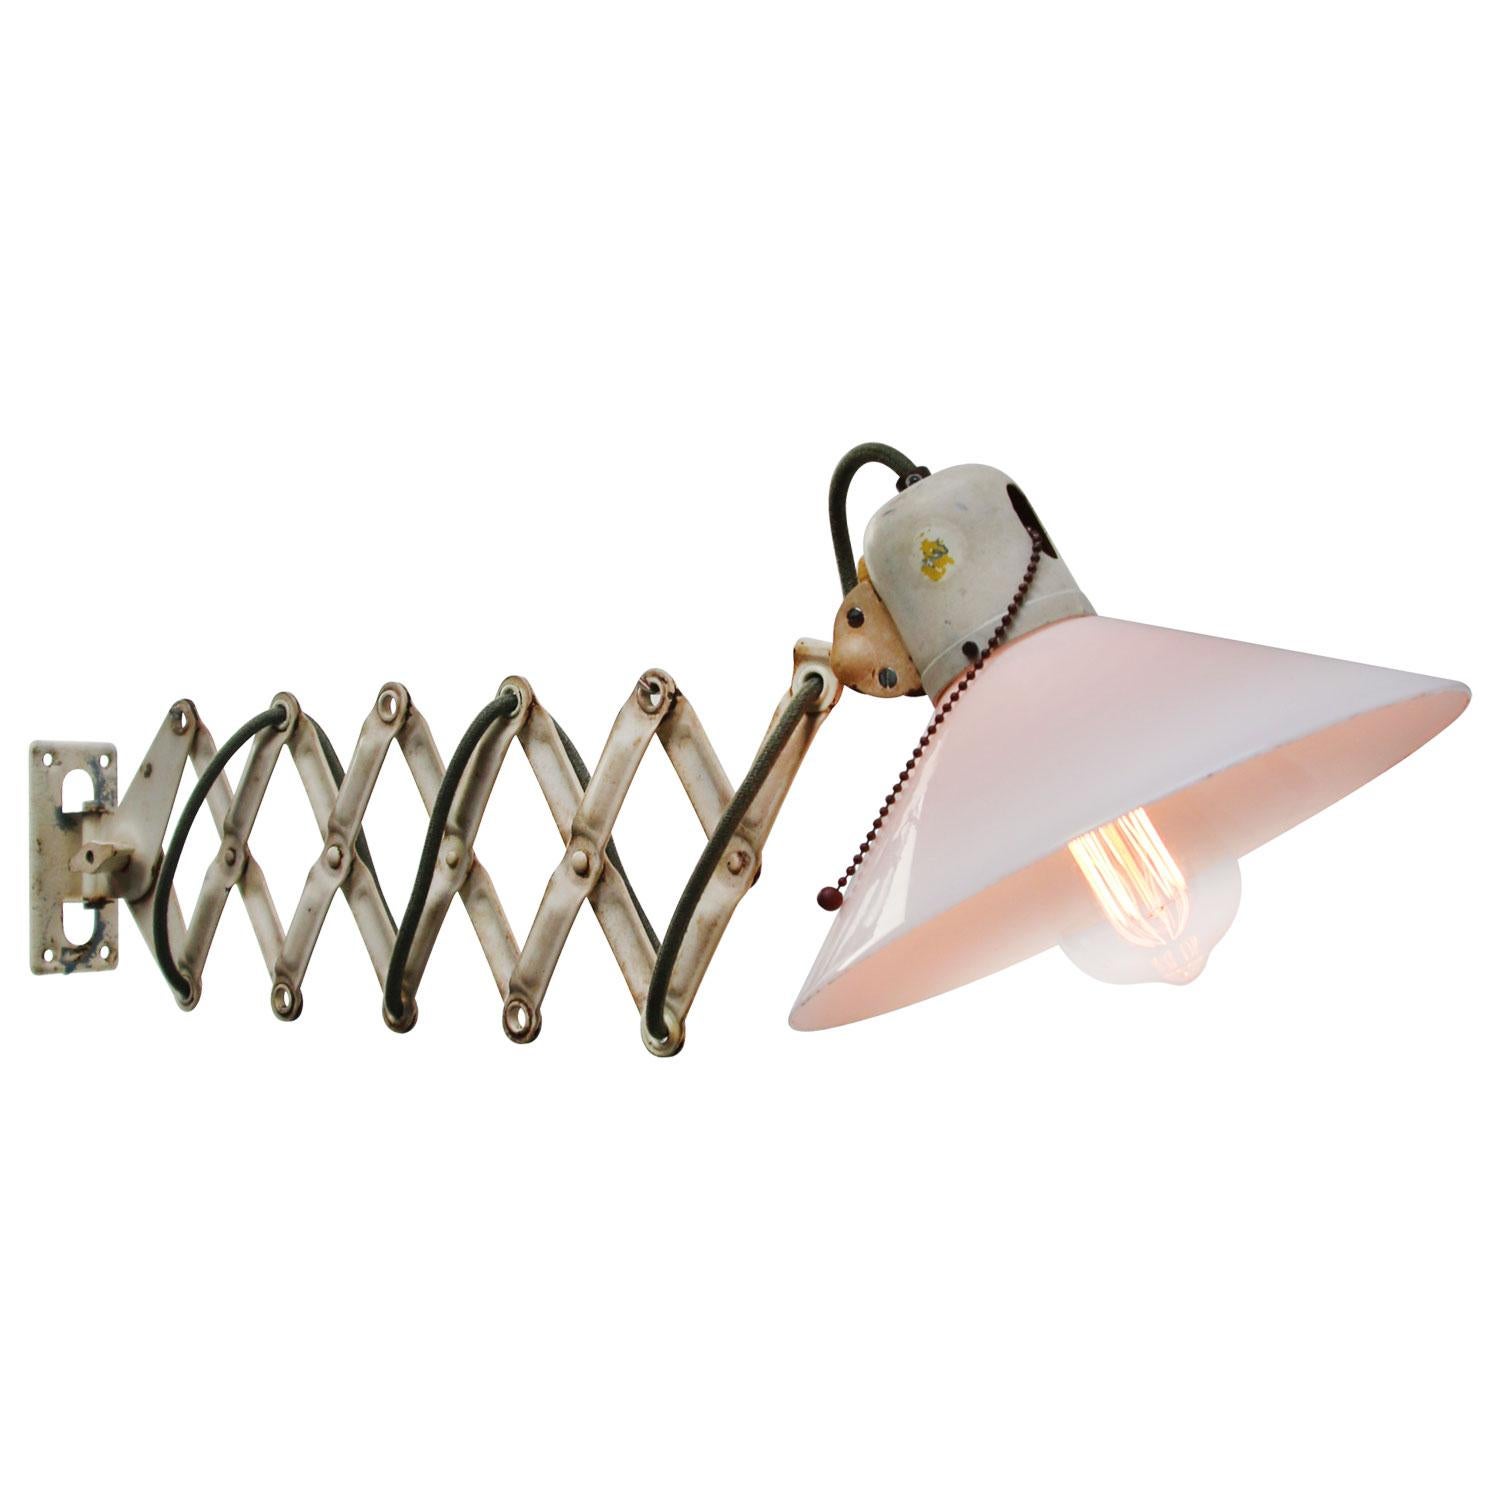 White metal scissor wall lamp
white opaline glass shade
adjustable length and angle

Shade size: Diameter 25 cm
angle adjustable shade

as shown on picture: 60 cm
min length 41 cm
max length 71 cm

Wall mount: 11.5 × 5.5 cm

Weight: